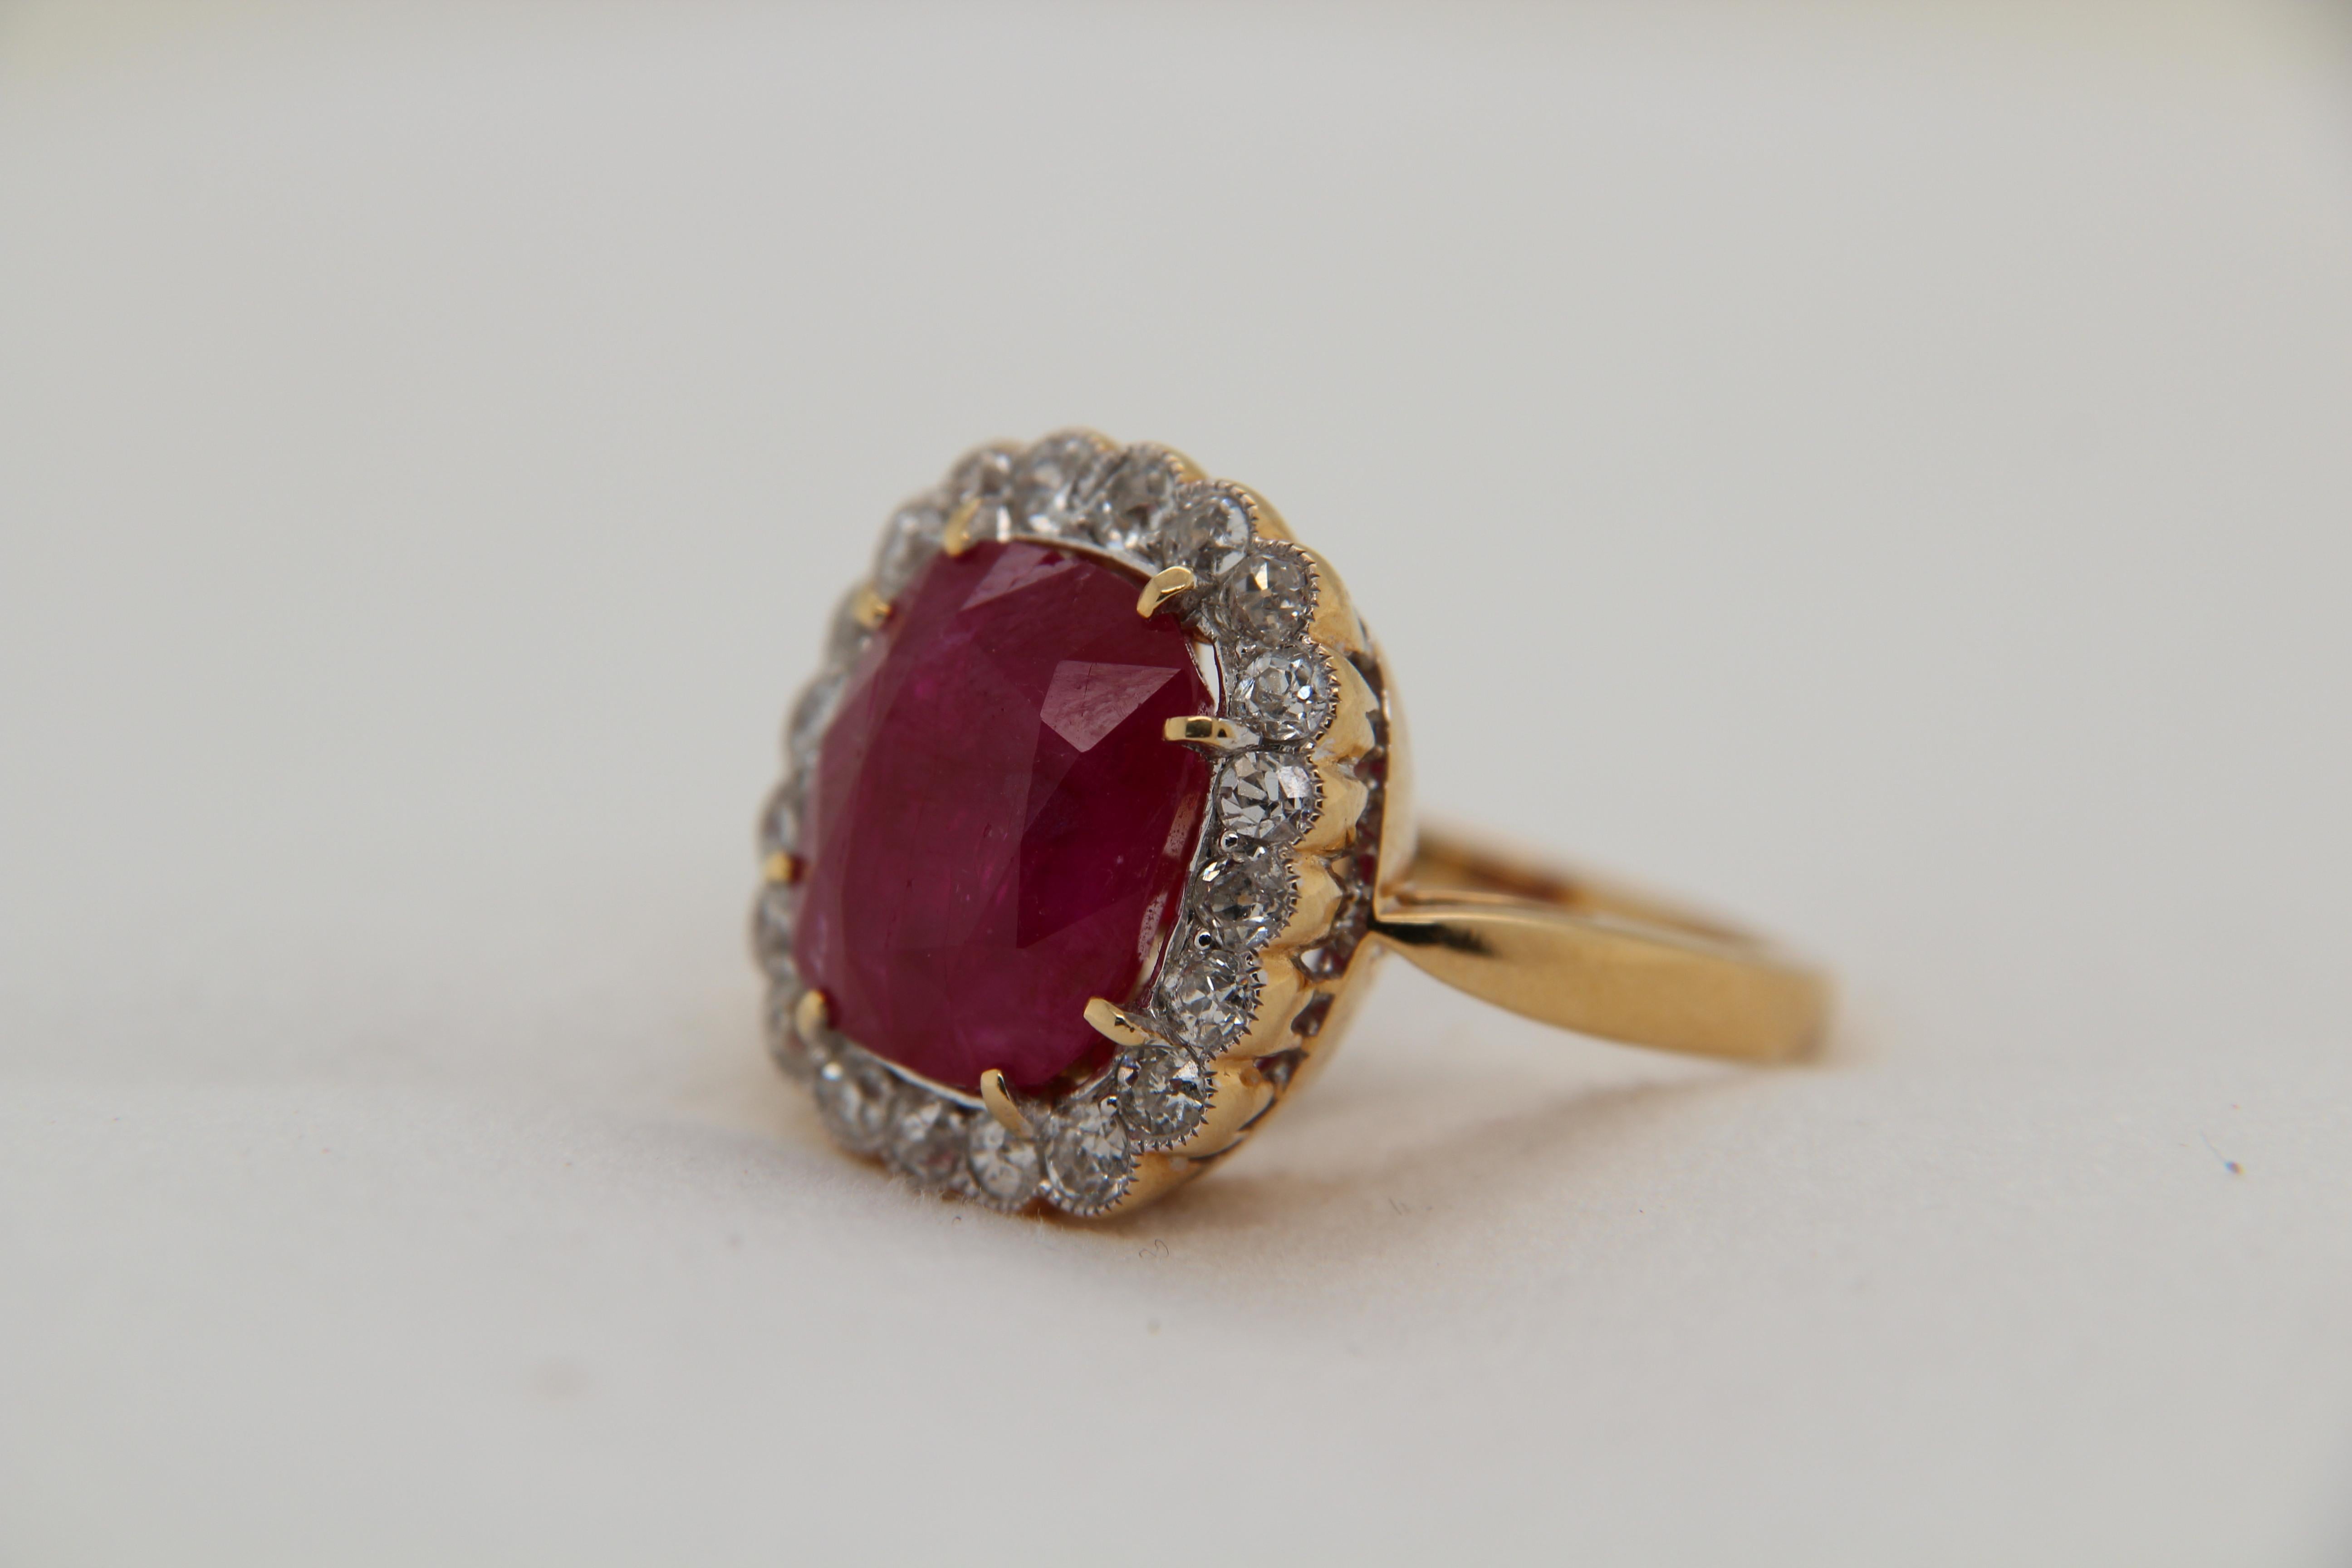 A brand new AGL (Thai) certified 9.73 burma ruby no heat purplish red and diamond ring in 18 karat gold . The ruby weigh 9.73 carat and diamond weigh 1.10 carat. The total ring weight is 10.25 grams. The ring size US 6.75 and EU 54.